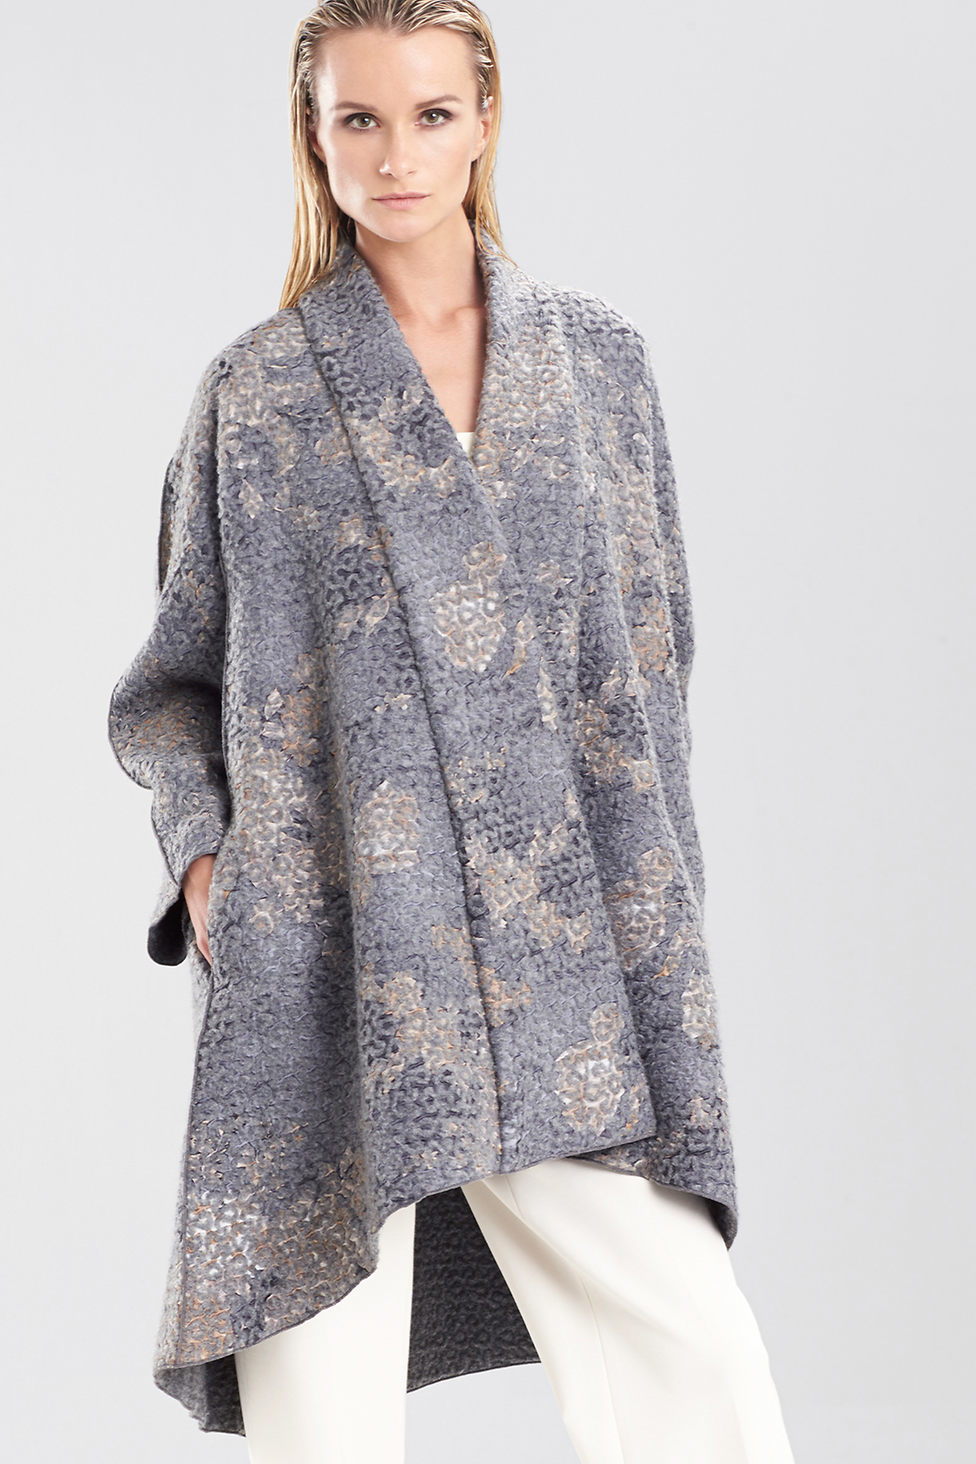 Natori Felted Jacquard Trapeze Coat in Gray | Lyst